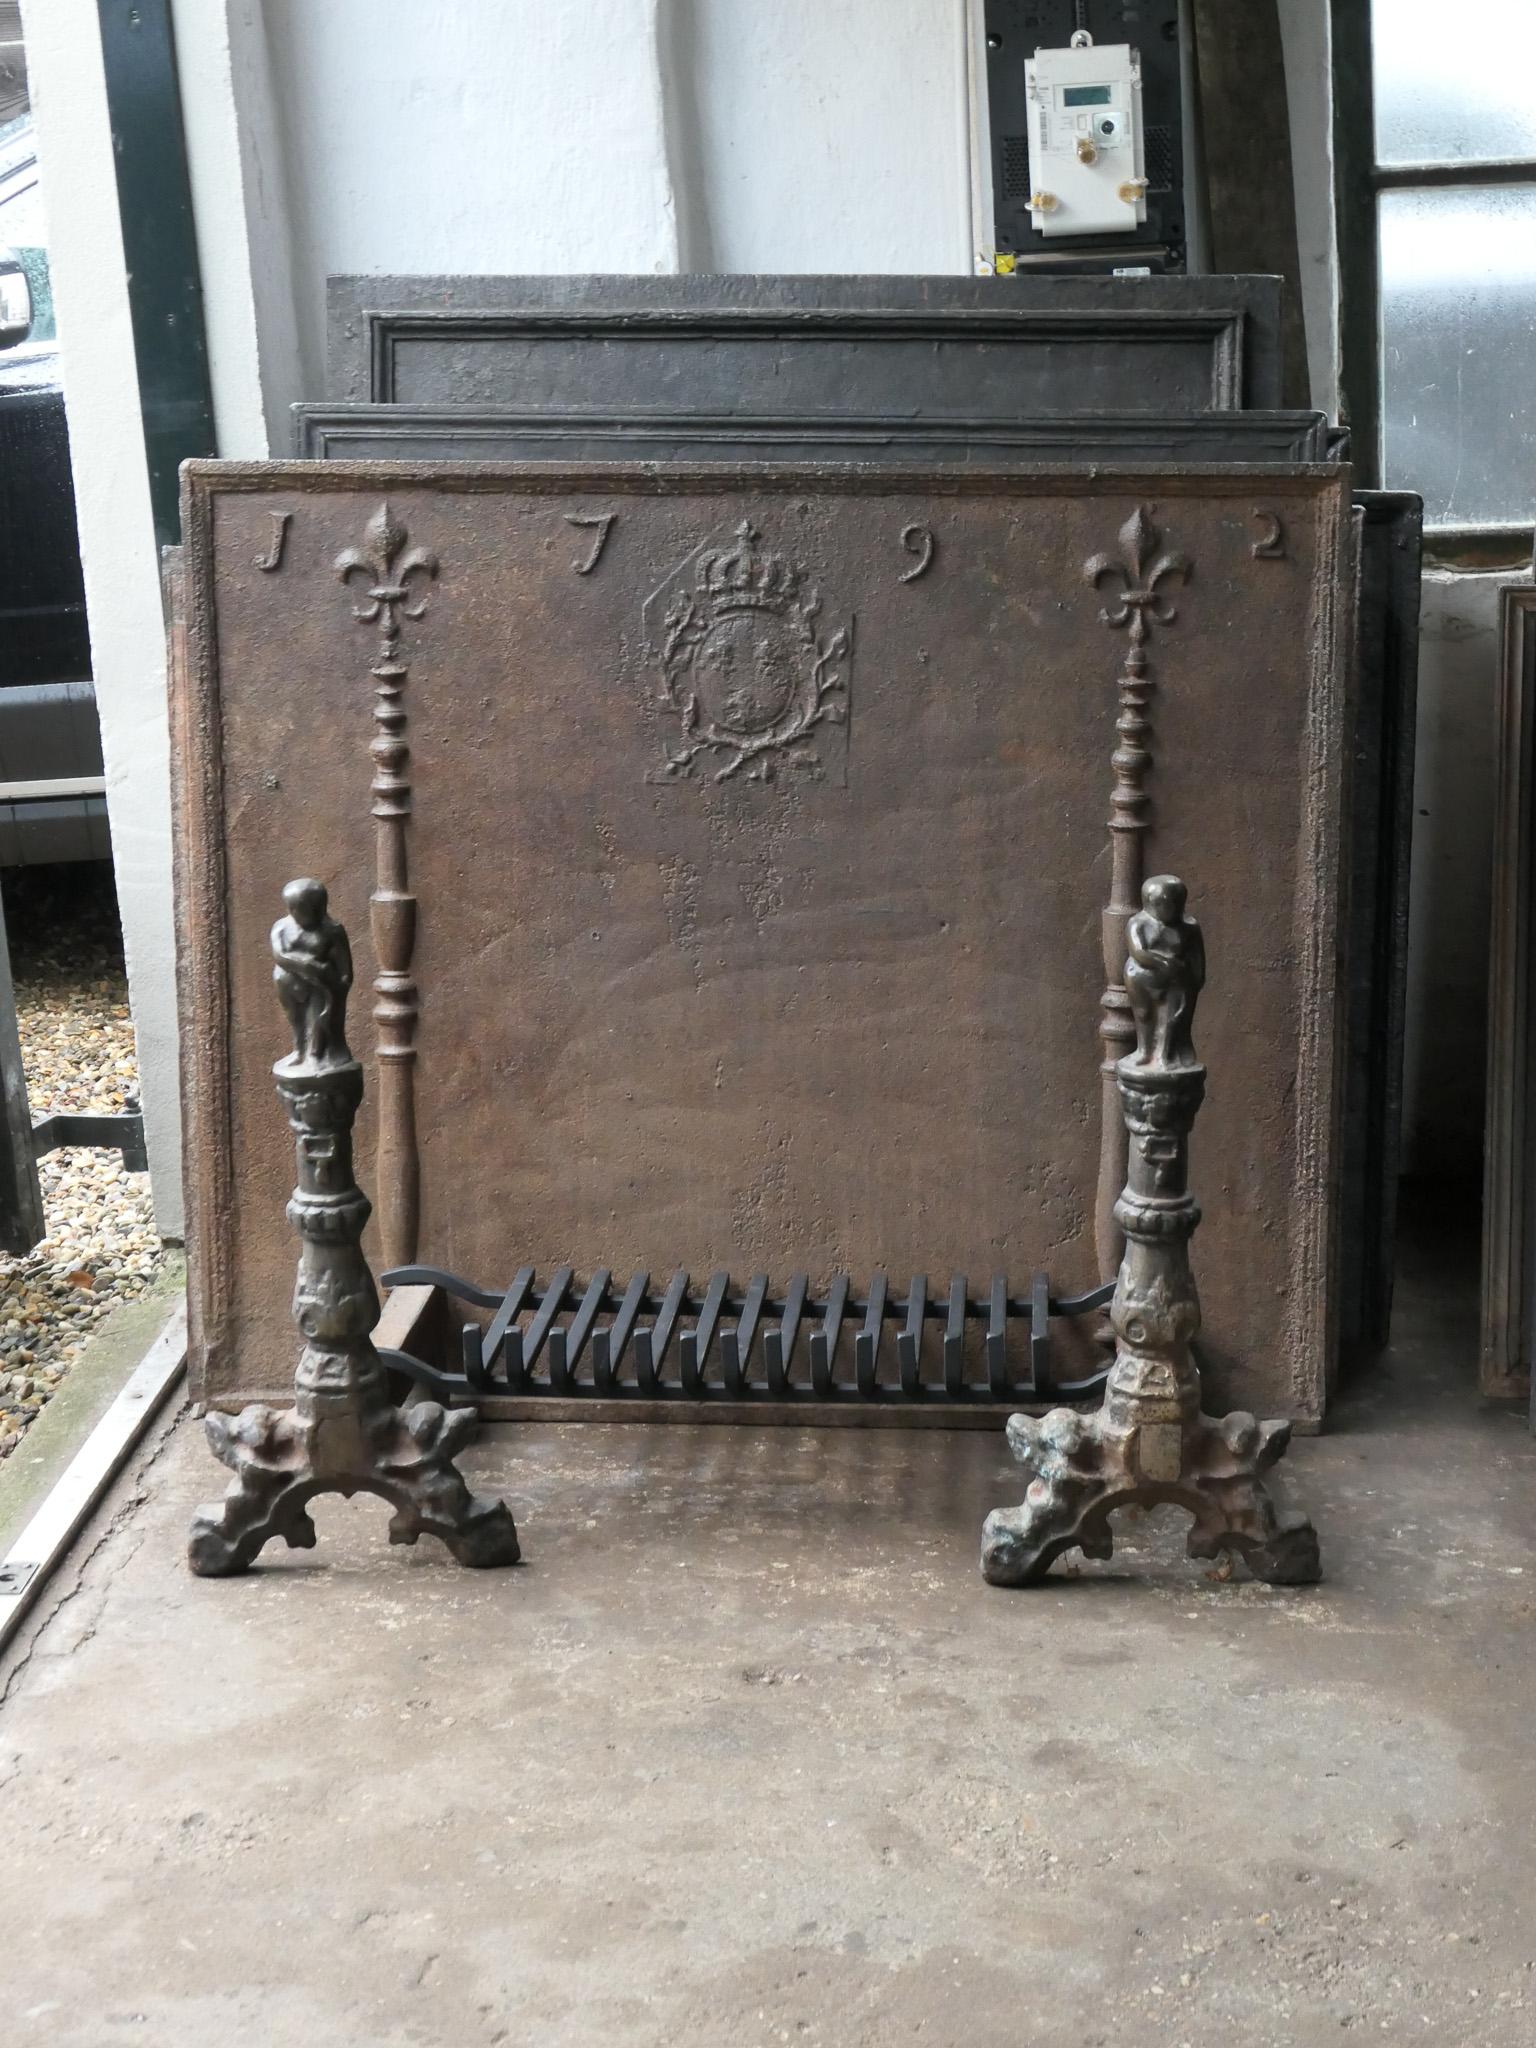 20th century French Neo-gothic fireplace basket - fire basket made of wrought iron and cast iron. The basket is in a good condition and is fully functional. The total width of the front of the fireplace grate is 104 cm or 40.9 inch.